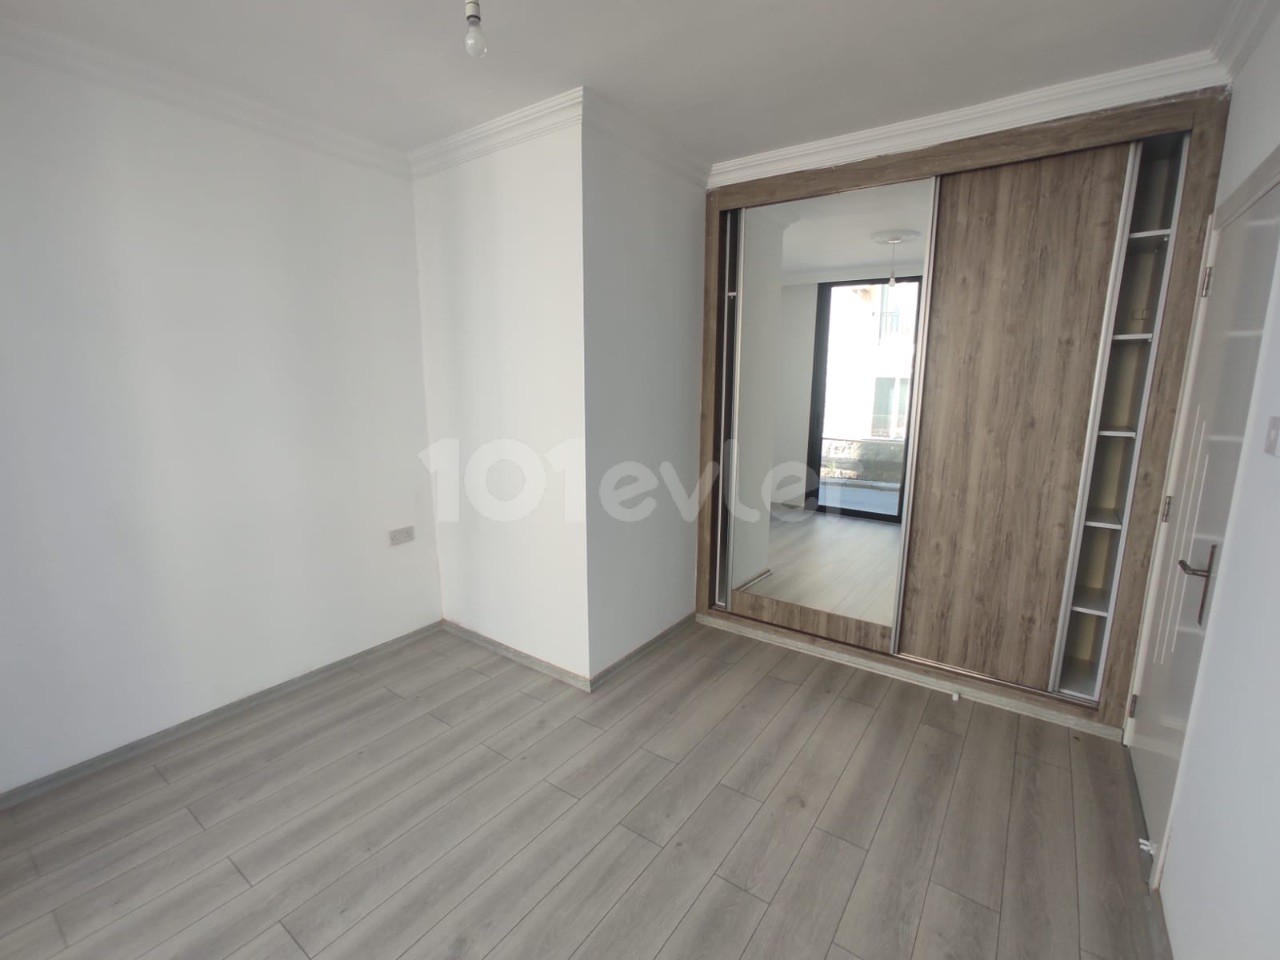 NEW 2+1 flat for sale in Alsancak in beautiful site with swimming pool